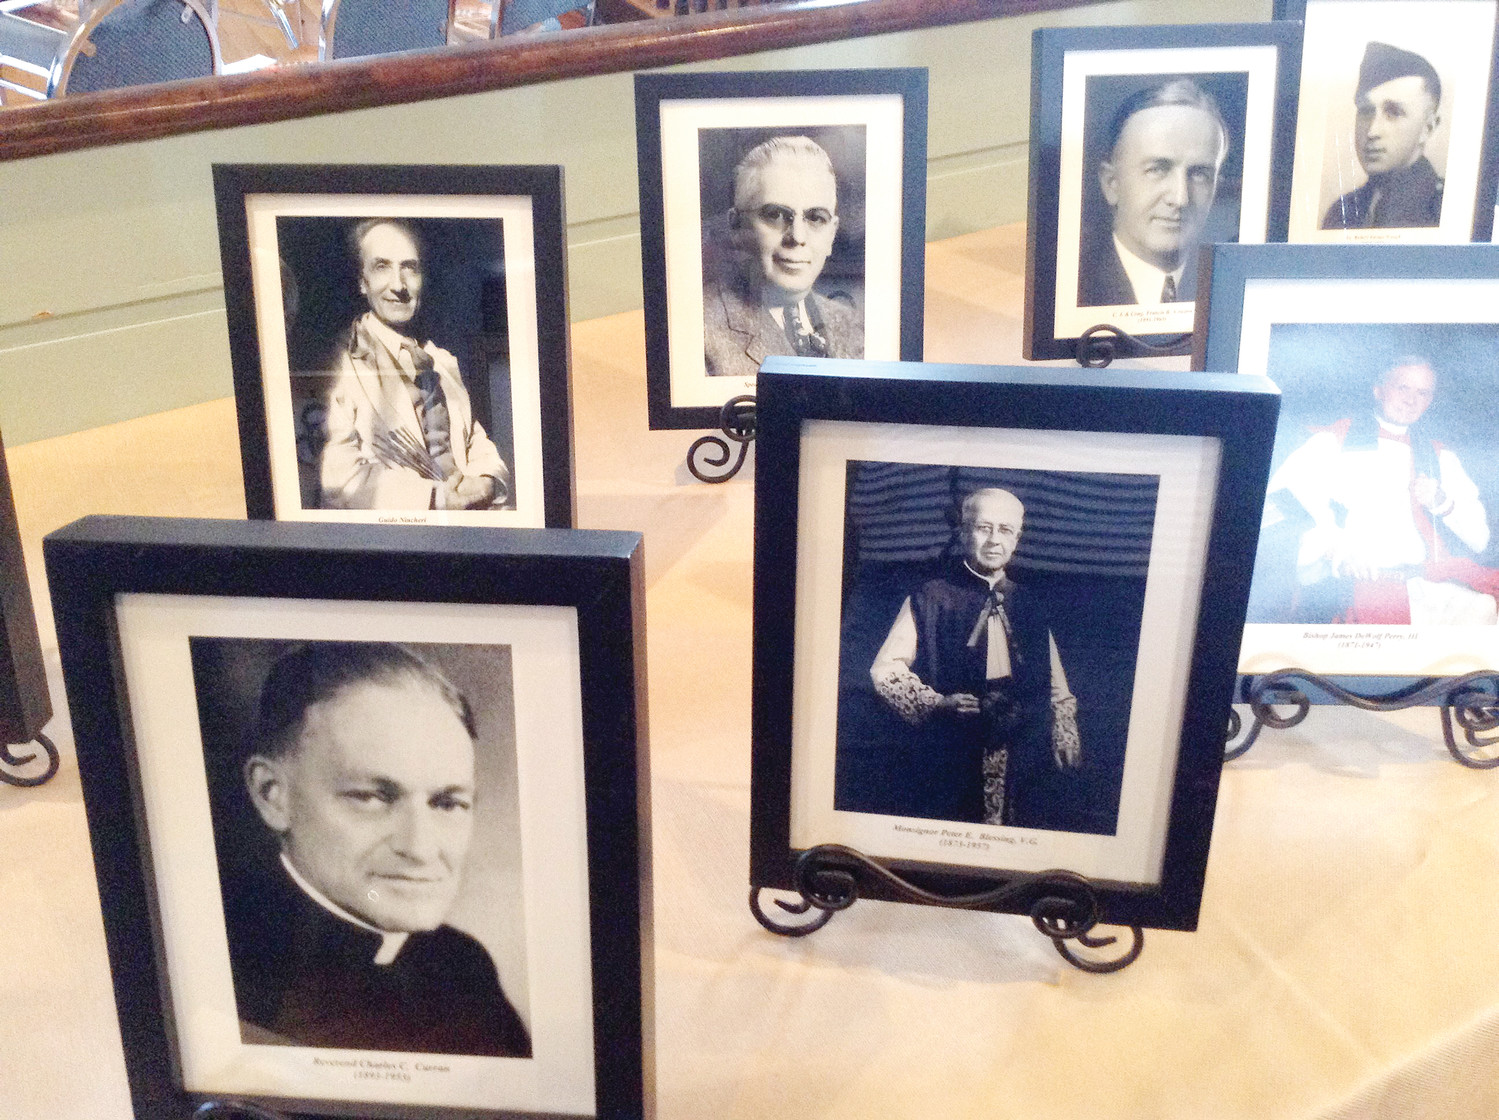 Photographs of several Rhode Islanders honored in the ceremony. Front row, left to right: Father Charles C Curran, Msgr. Peter Blessing and Episcopal Bishop James DeWolf-Perry, III.  Second row, left to right: Guido Nincheri, Speaker Harry Curvin, Chief Justice Francis Condon, 
and Lt. Robert Waugh Turner.